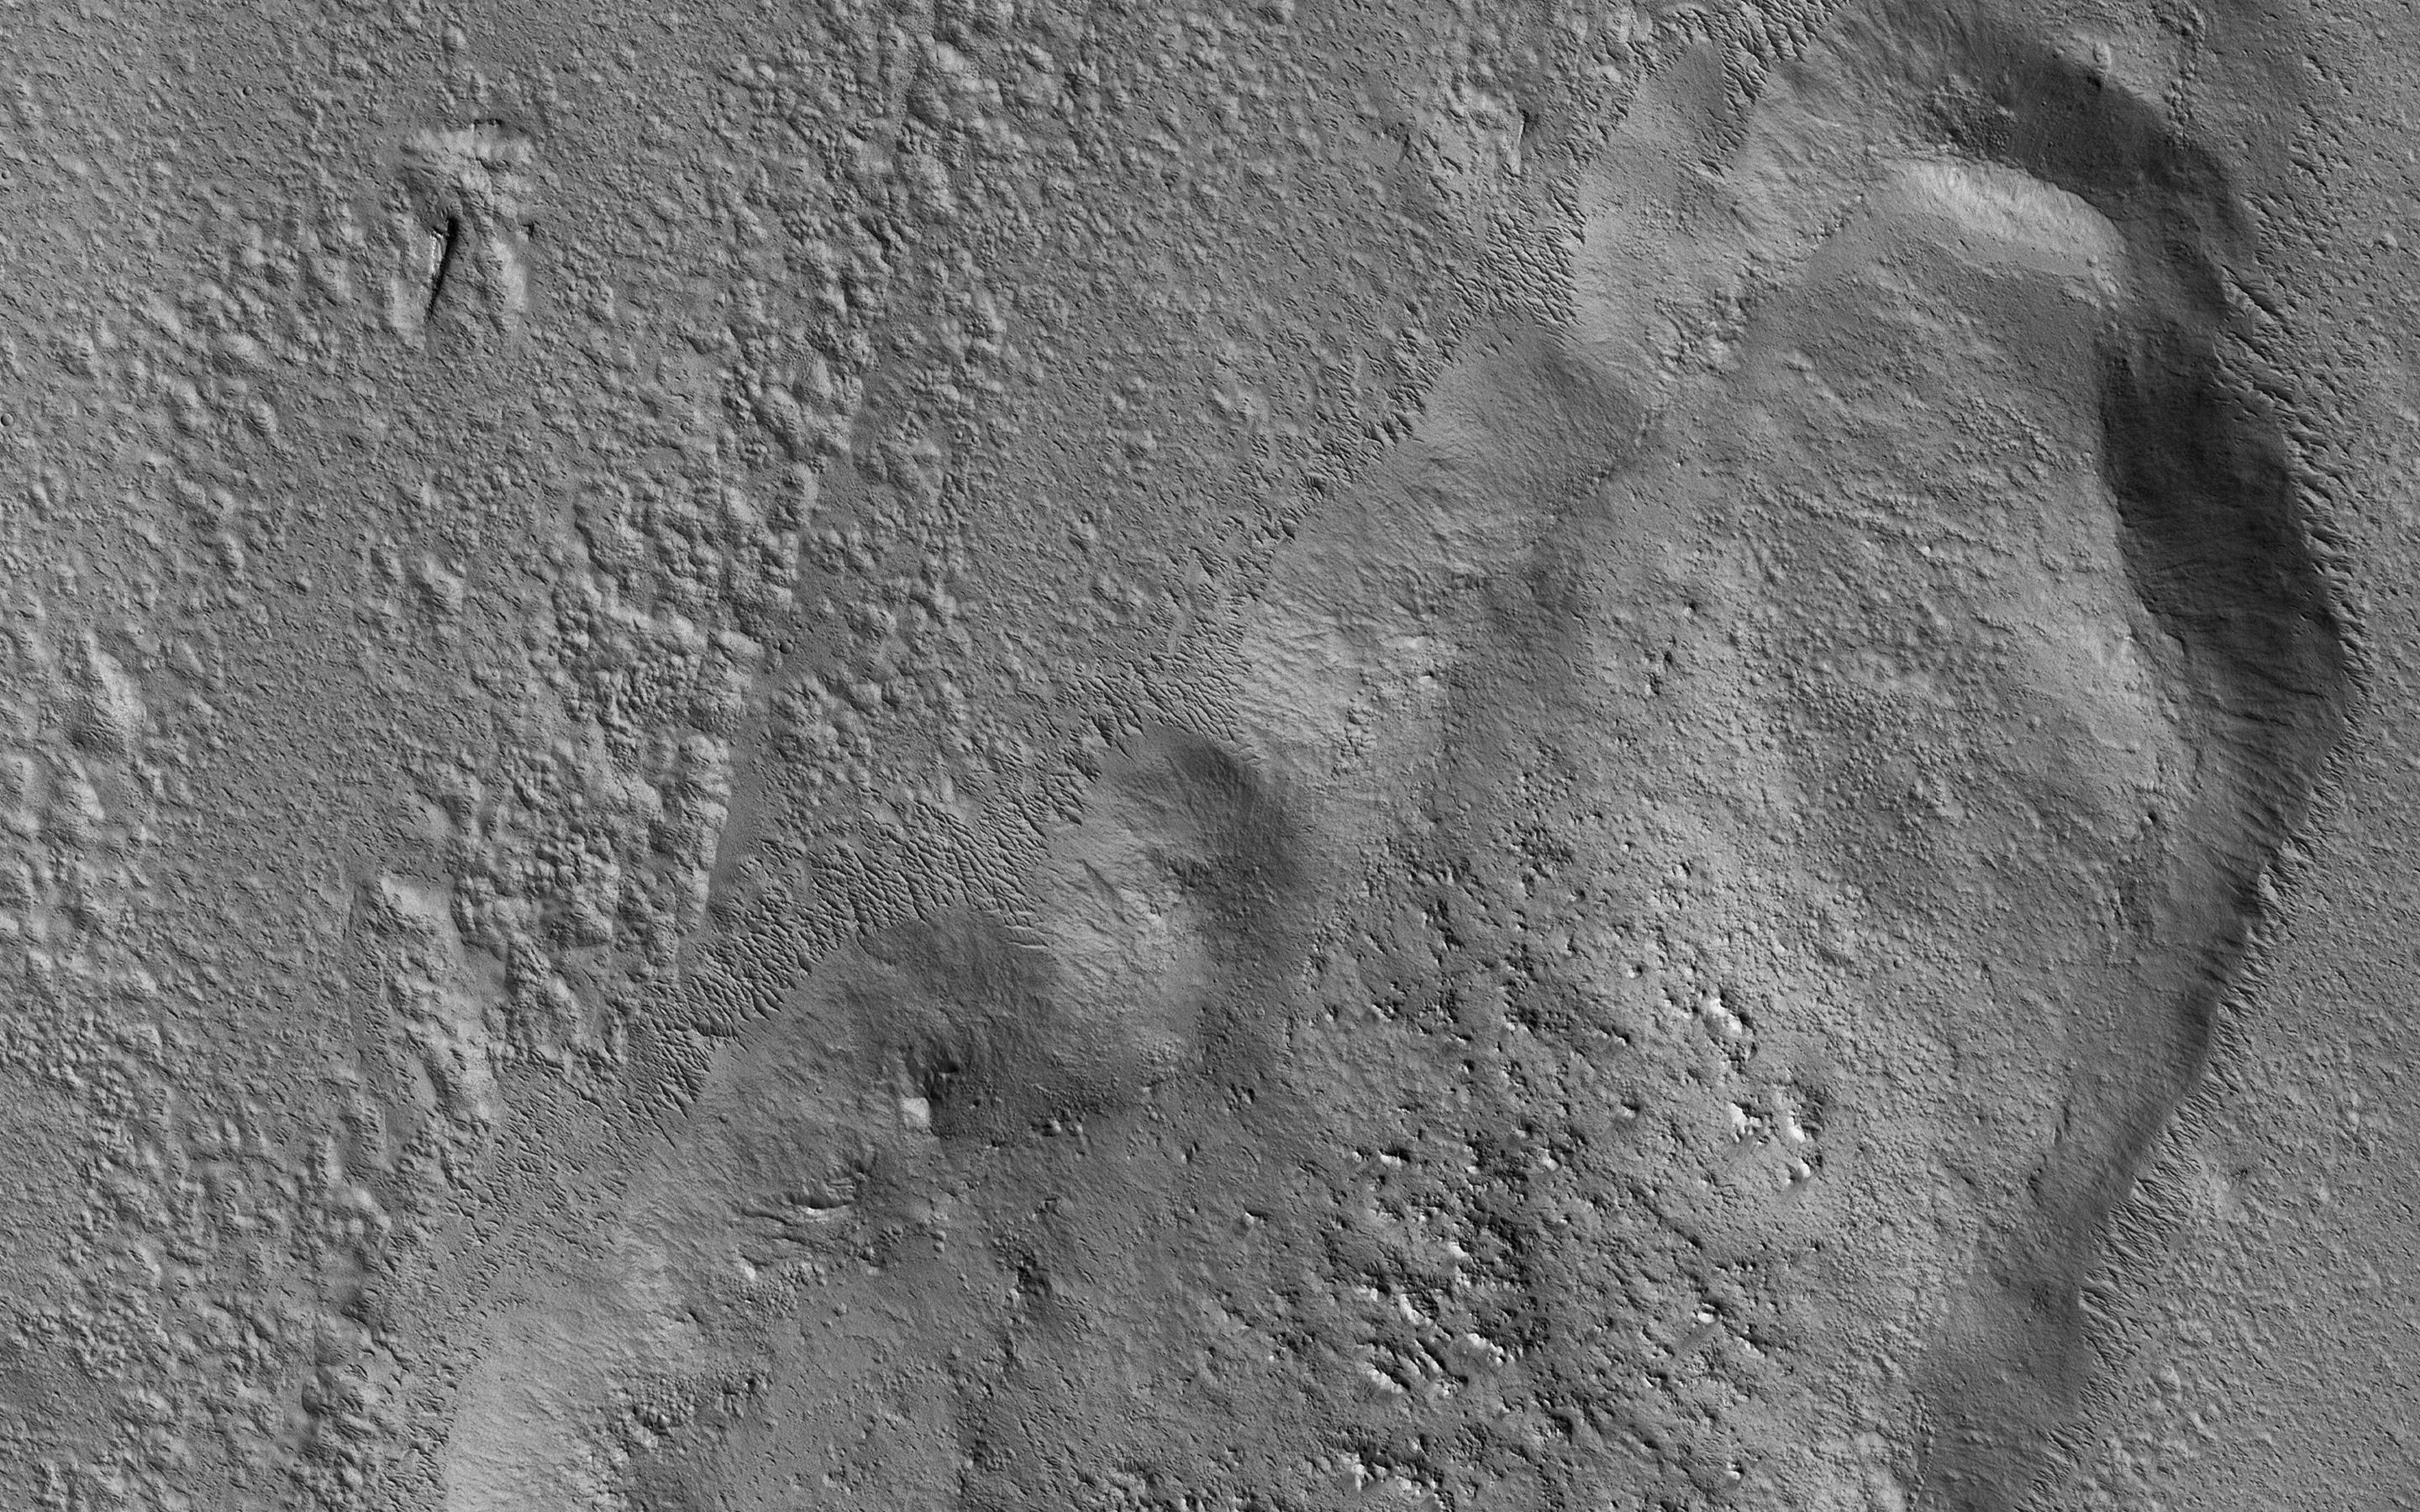 PIA23286: Tooting Crater Ejecta